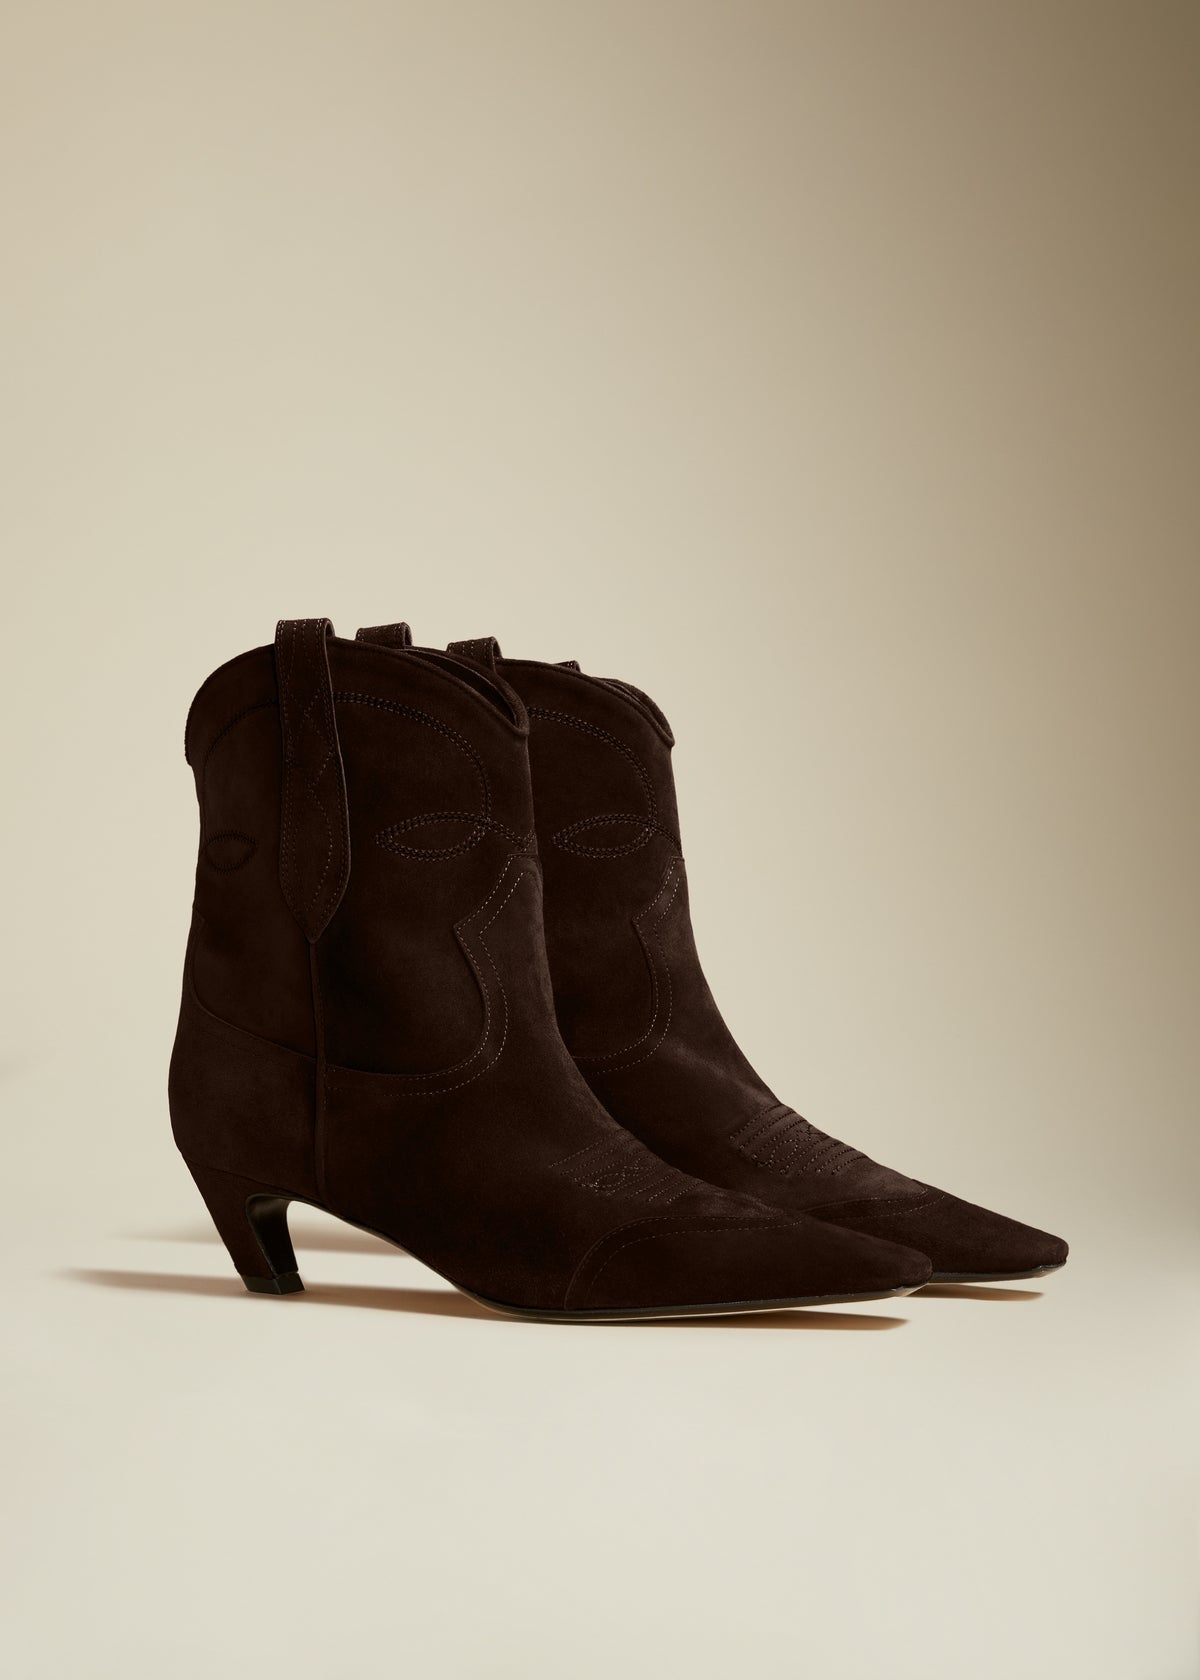 The Dallas Ankle Boot in Coffee Suede - 2